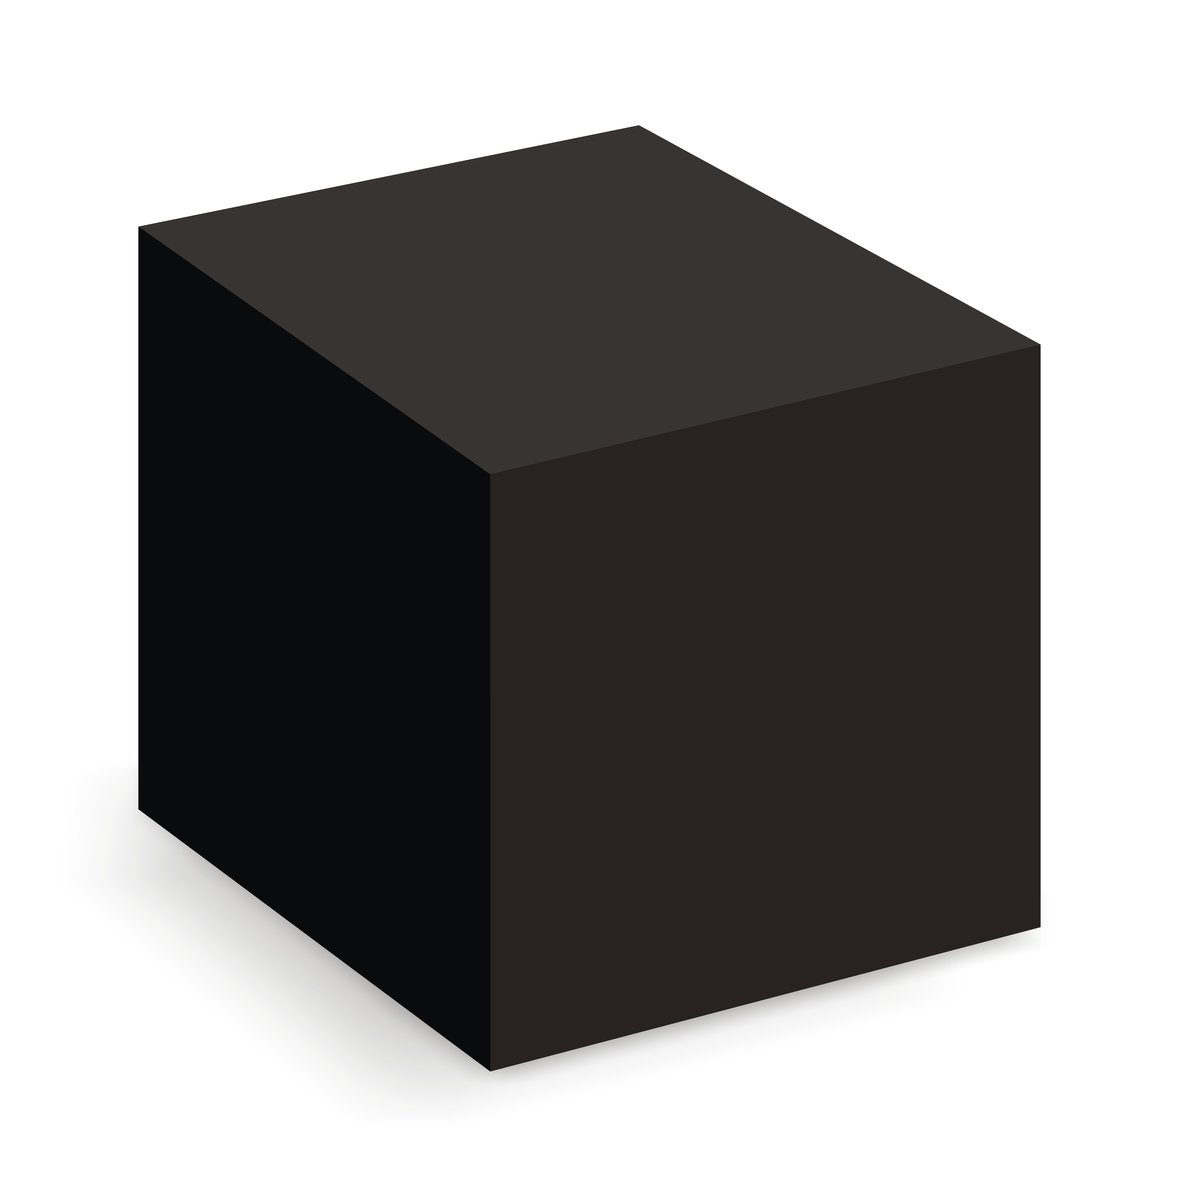 an angled black cube stands in front of a white background